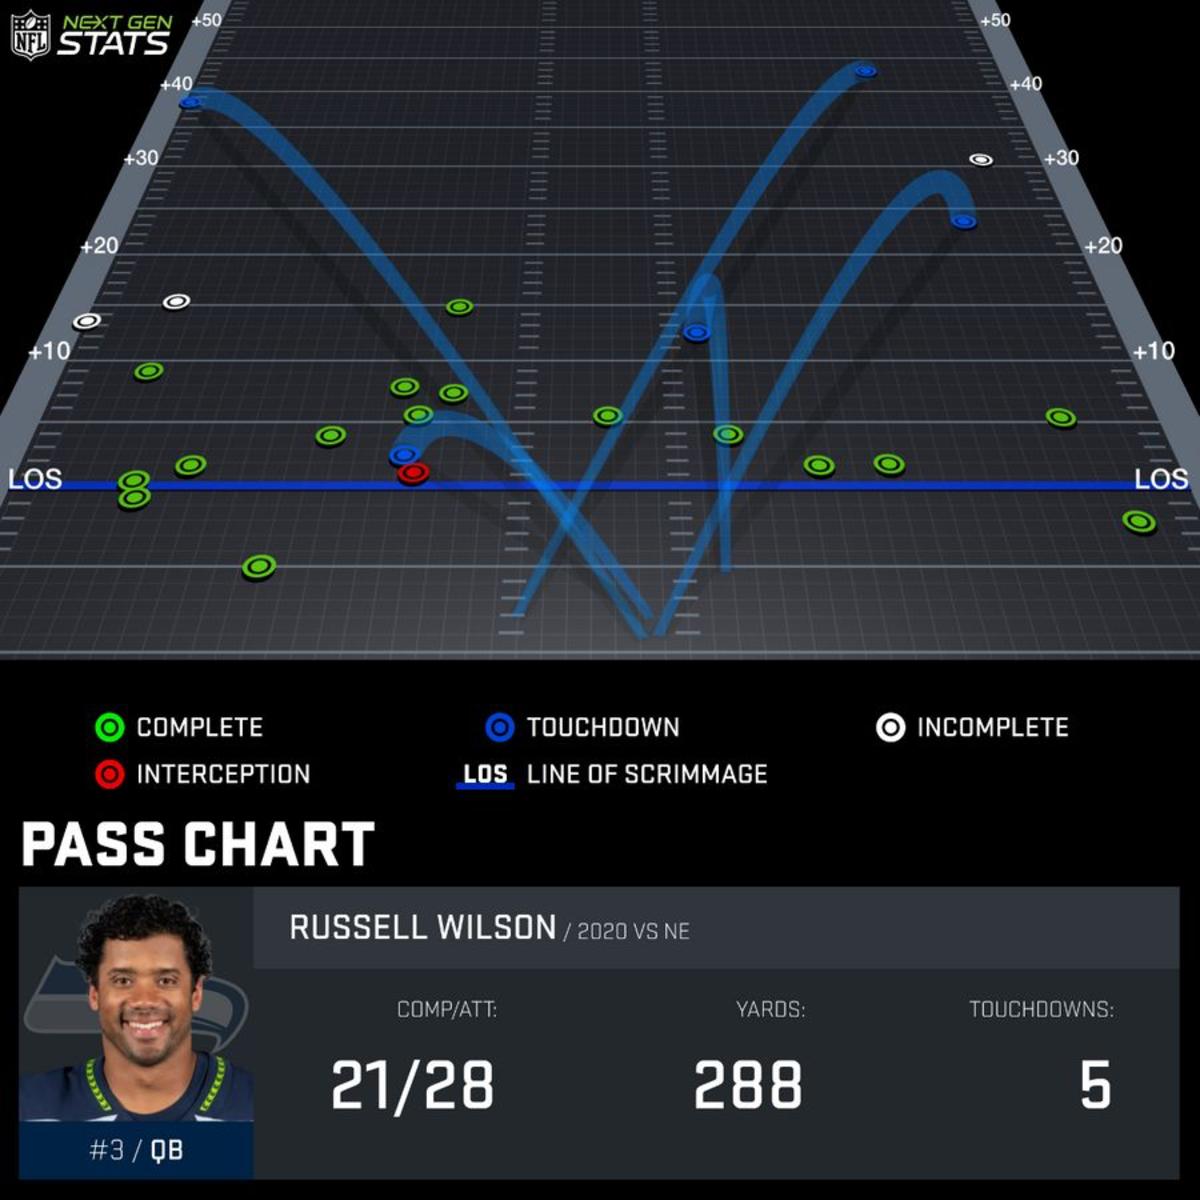 Wilson's stat map indicates he secures first downs as well as 40+ yard touchdowns. 